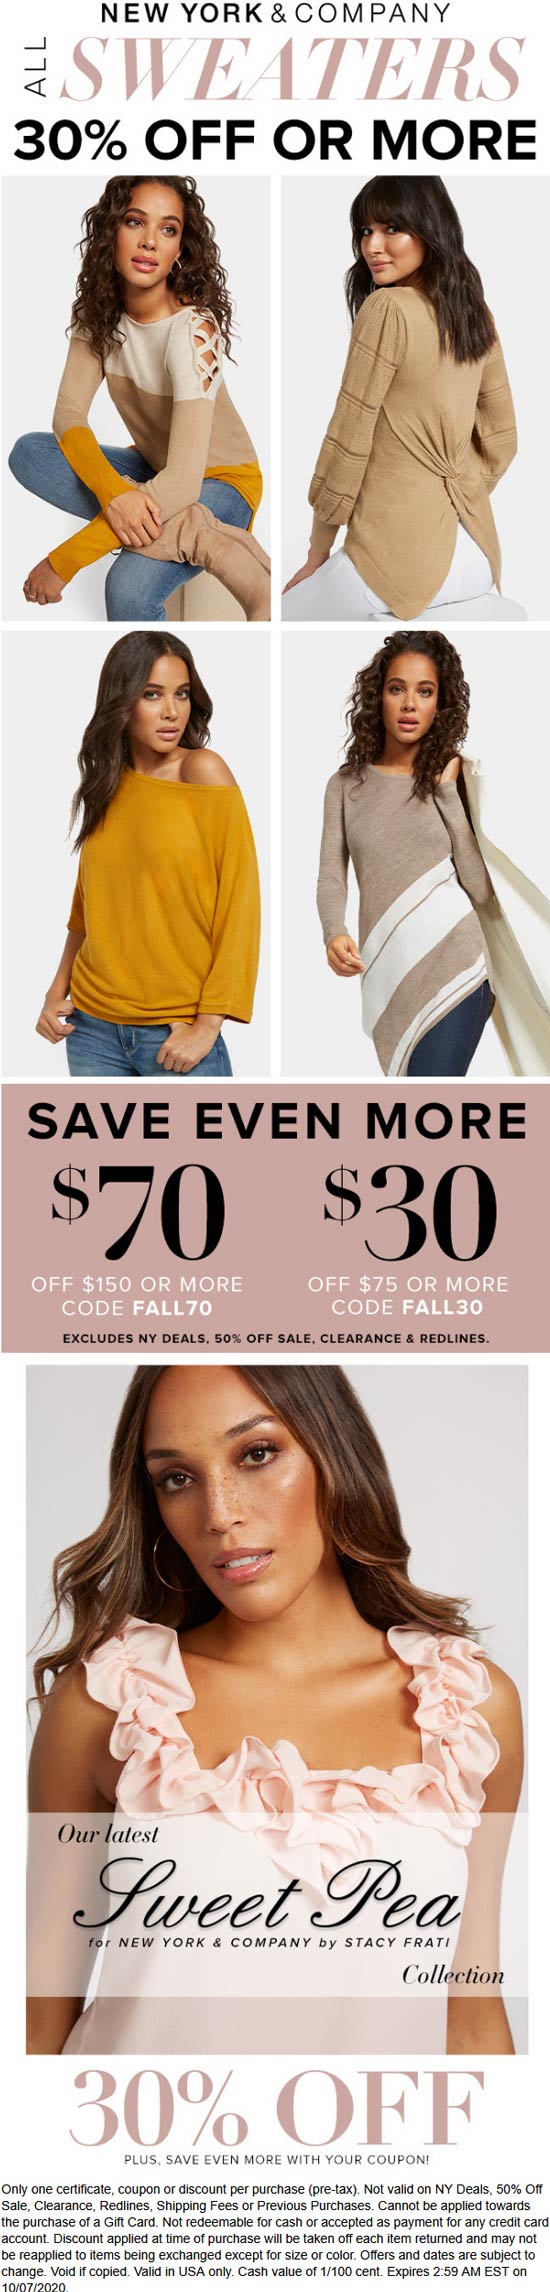 30 off 75 & more today at New York & Company, or online via promo